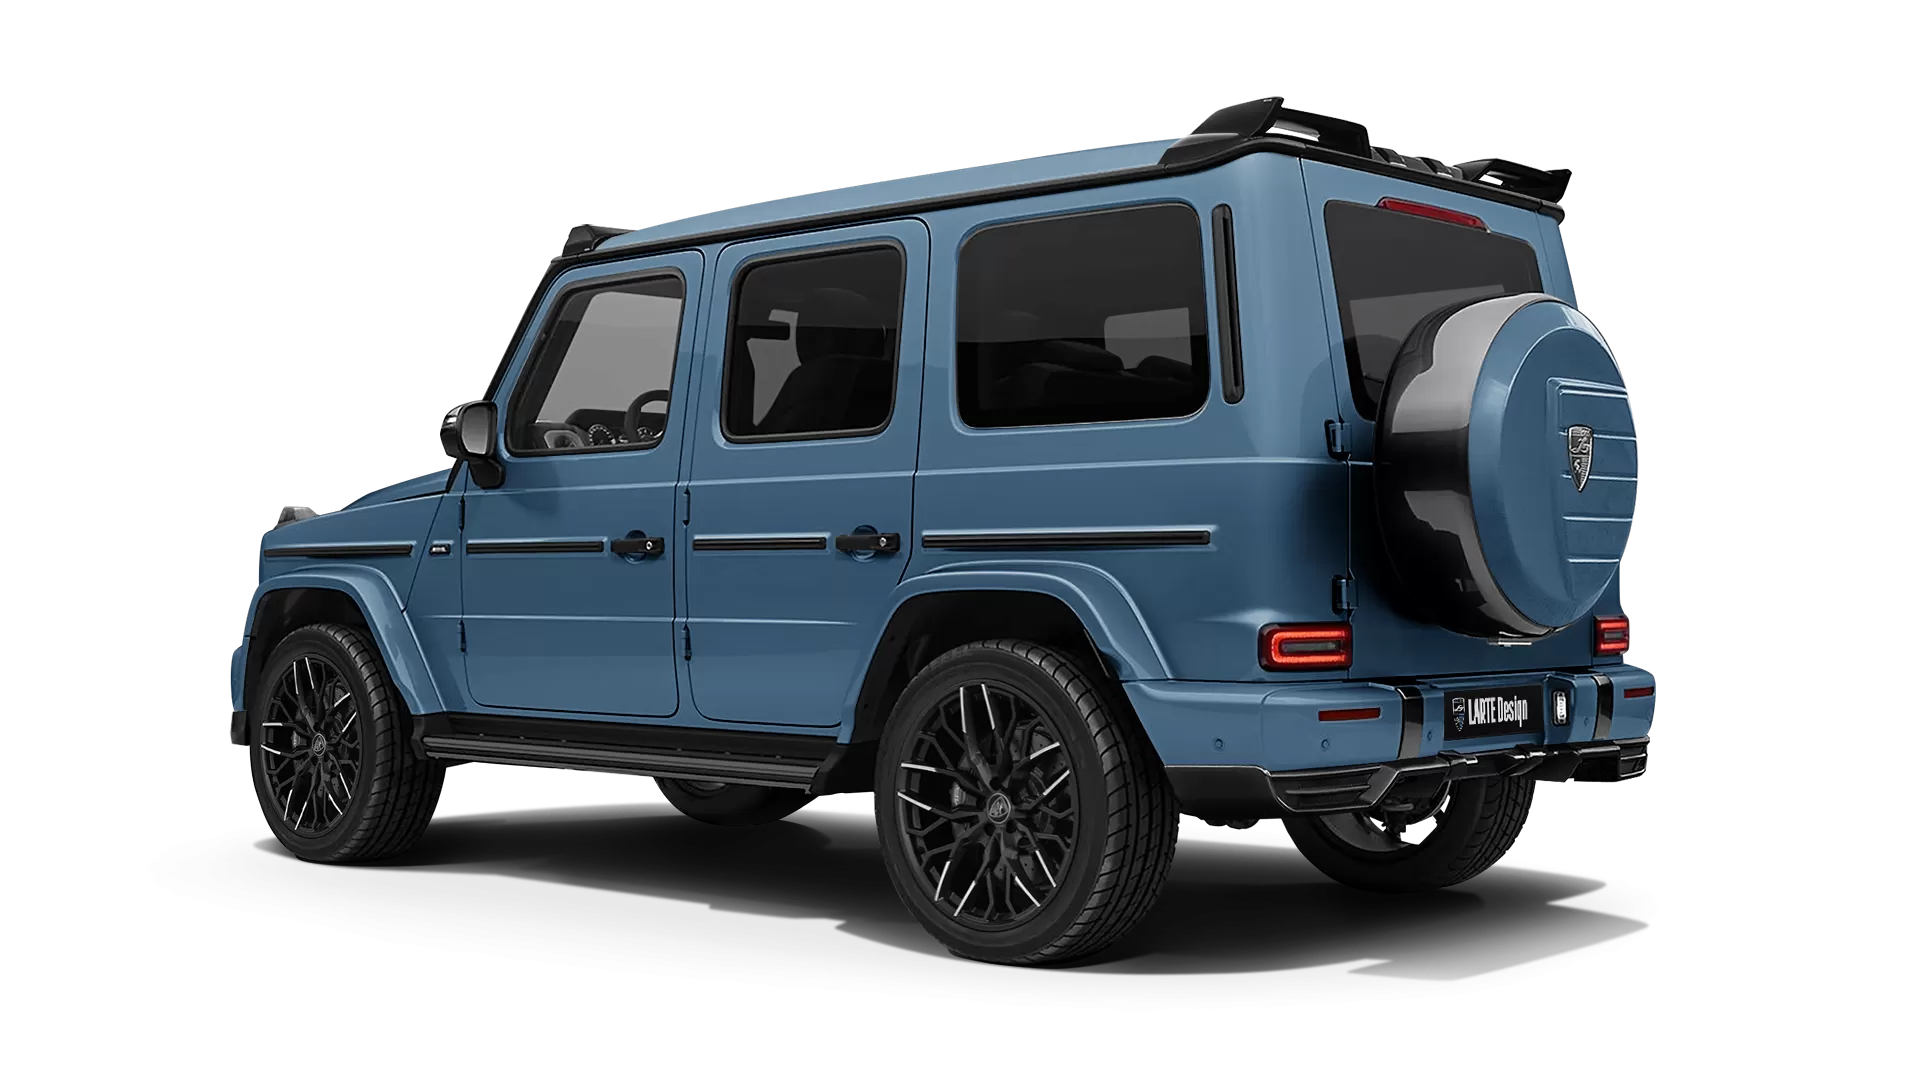 Mercedes G class W463 with painted body kit: rear view shown in Vintage Blue